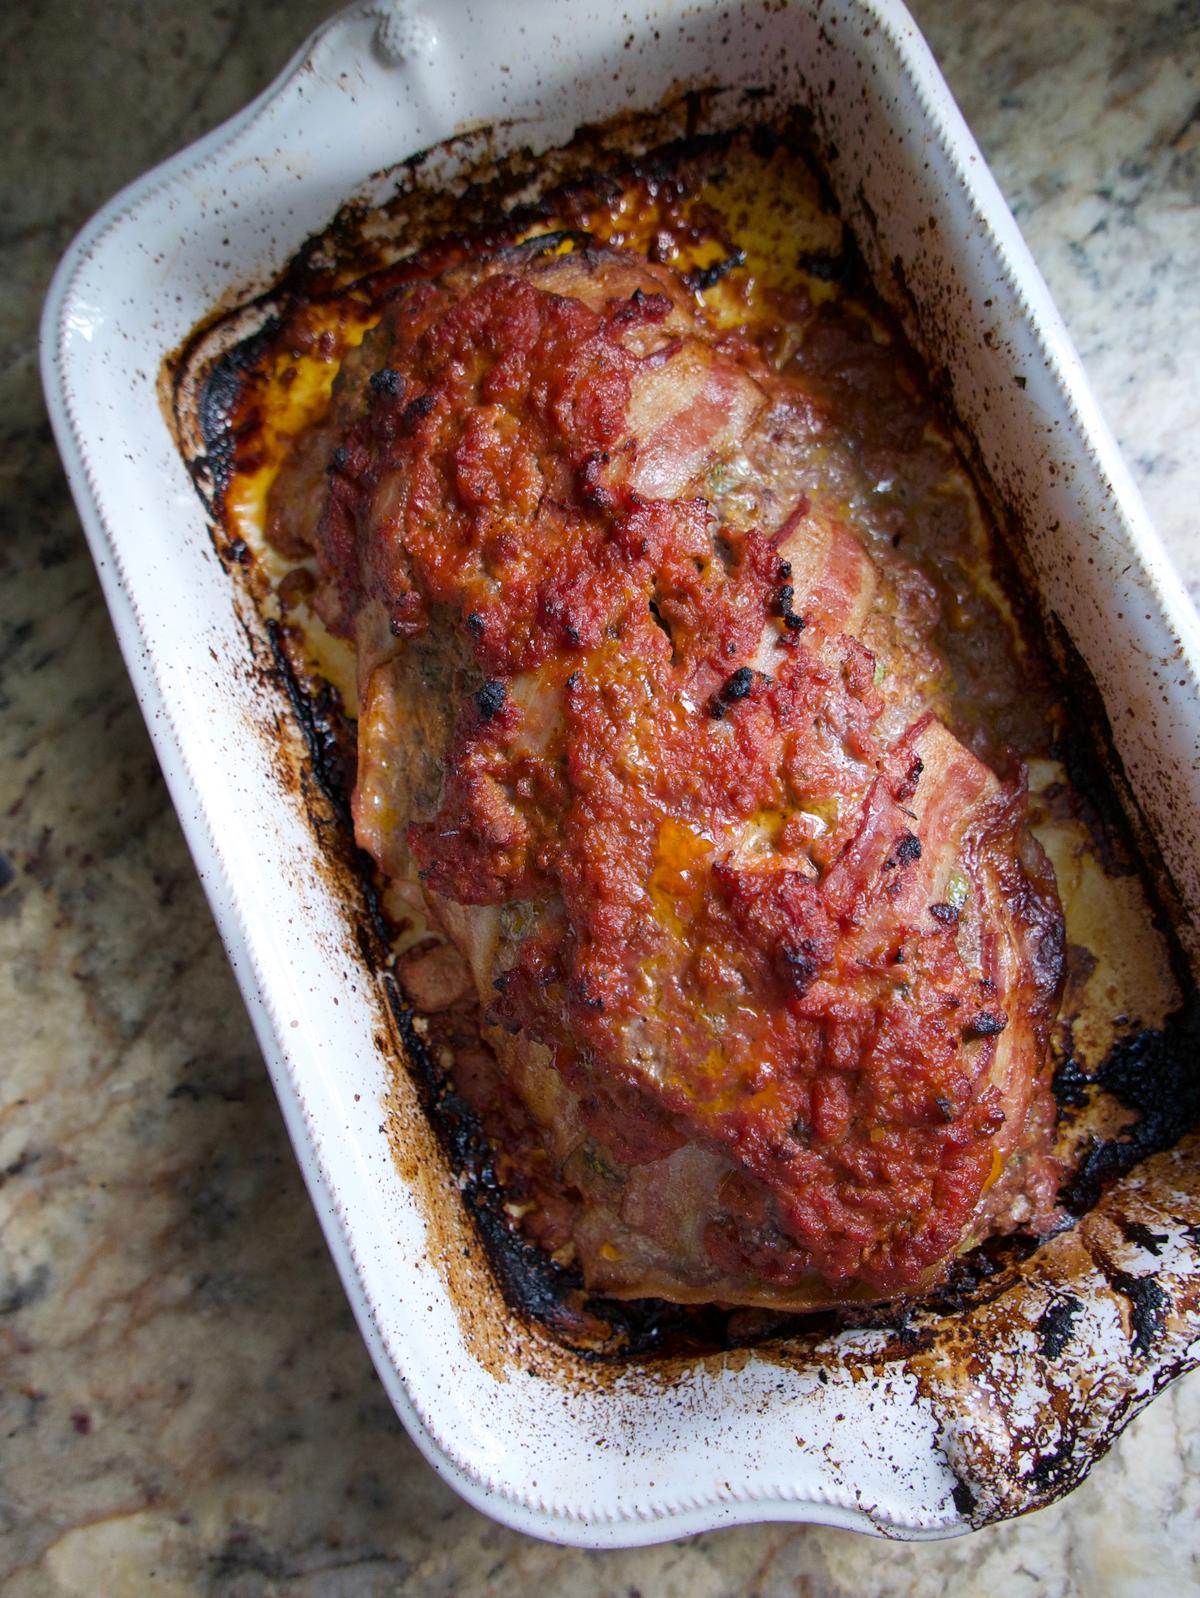 Wrapping this meatloaf in bacon and covering it in tomato sauce gives it a browned, crunchy crust. (Victoria de la Maza)